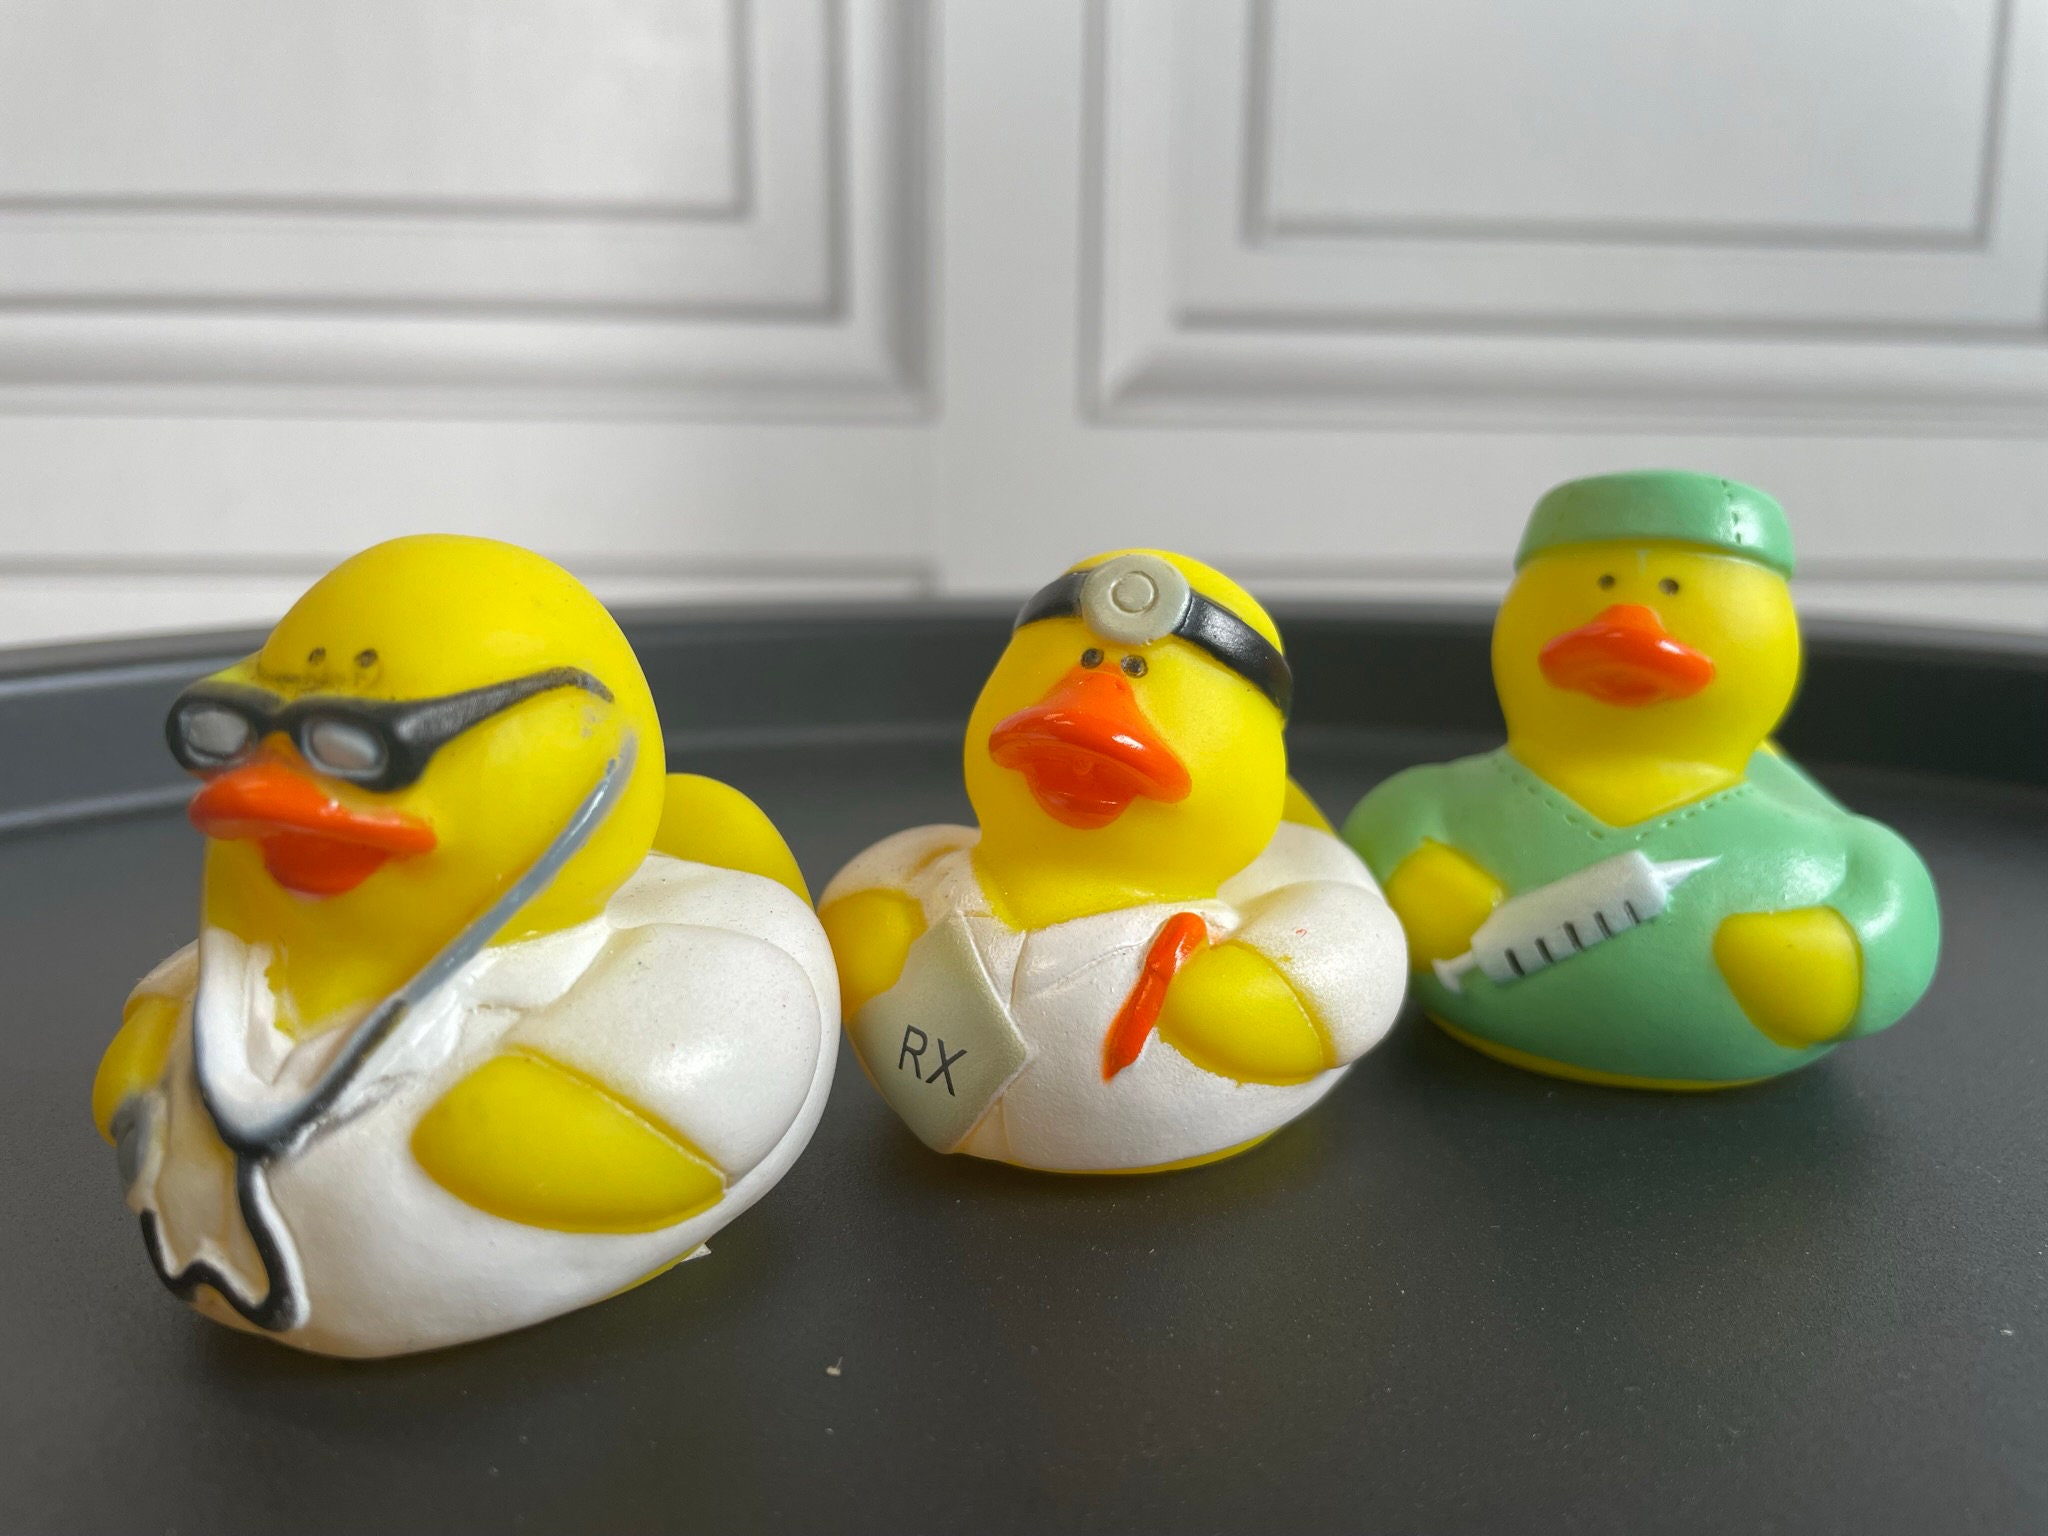 Rubber Duck Doctor Decor Car Home Office Cute Ornament Squeak Yellow Ducky  New